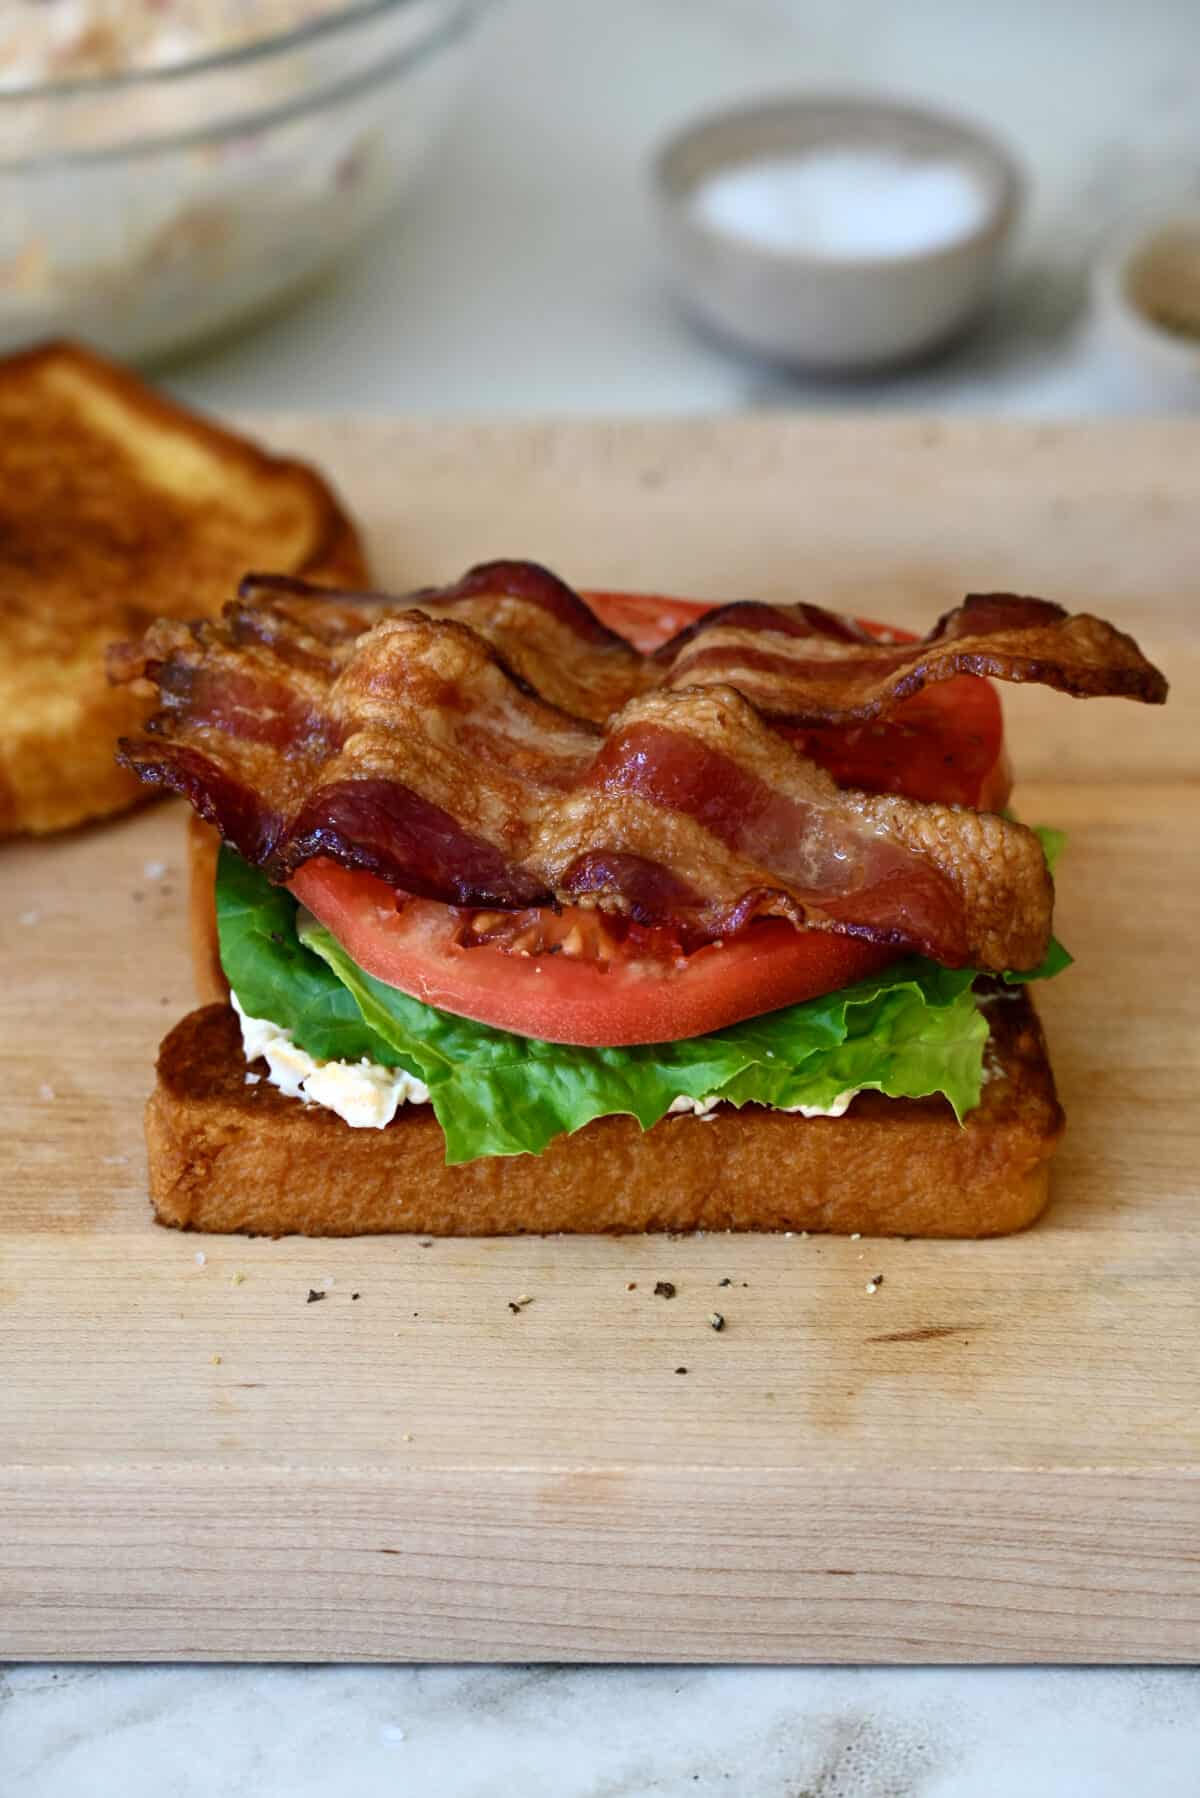 A slice of bread topped with pimento cheese, romaine lettuce, slices of tomato and two crispy bacon slices on a wood cutting board beside a slice of toast.